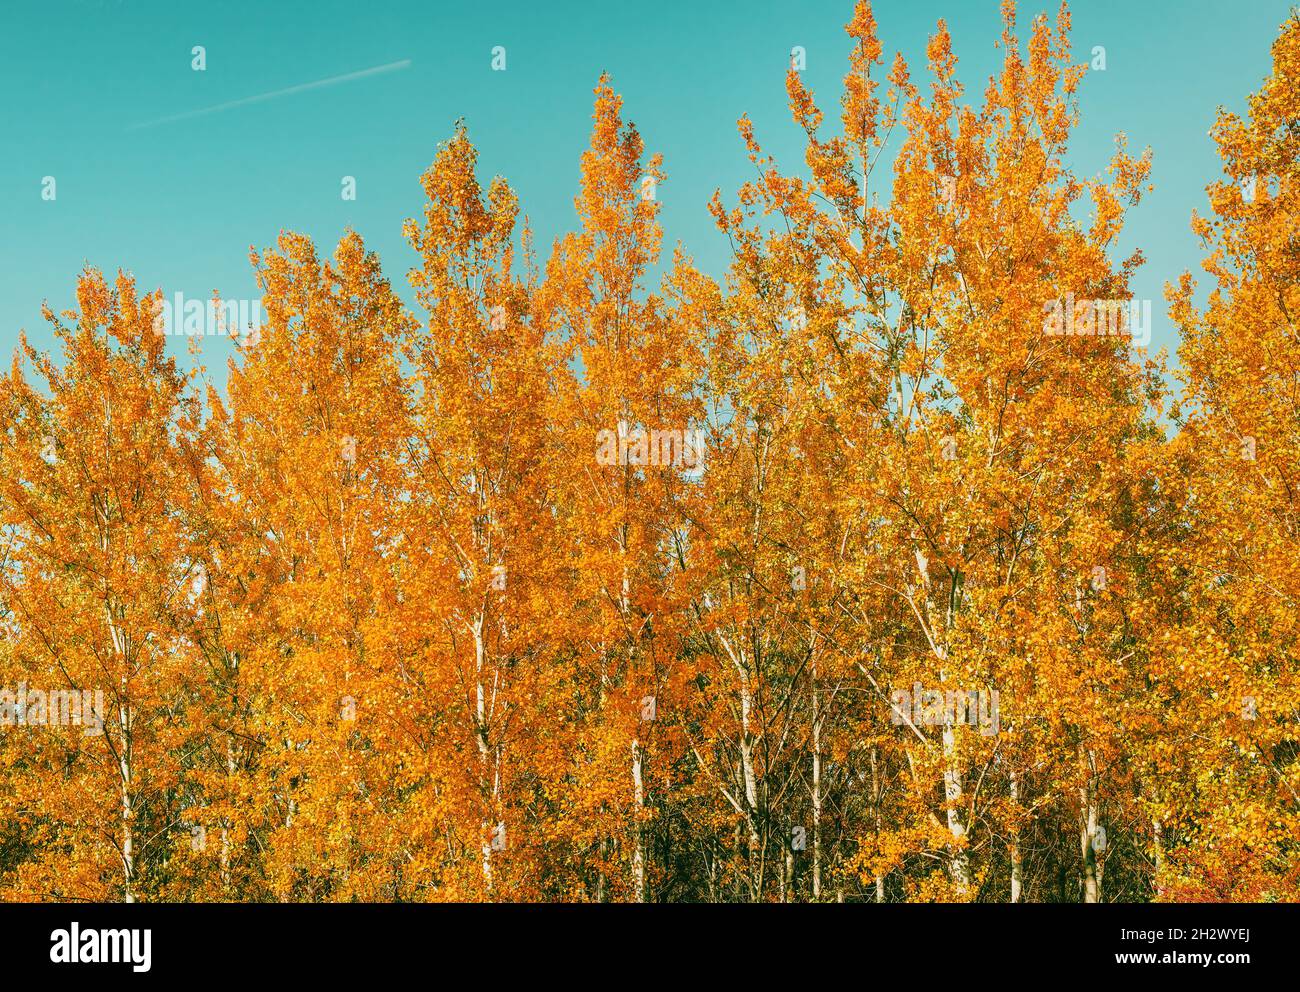 Fall season and beauty in nature, beautiful poplar forest landscape scenery in october, orange leaves on tall trees Stock Photo